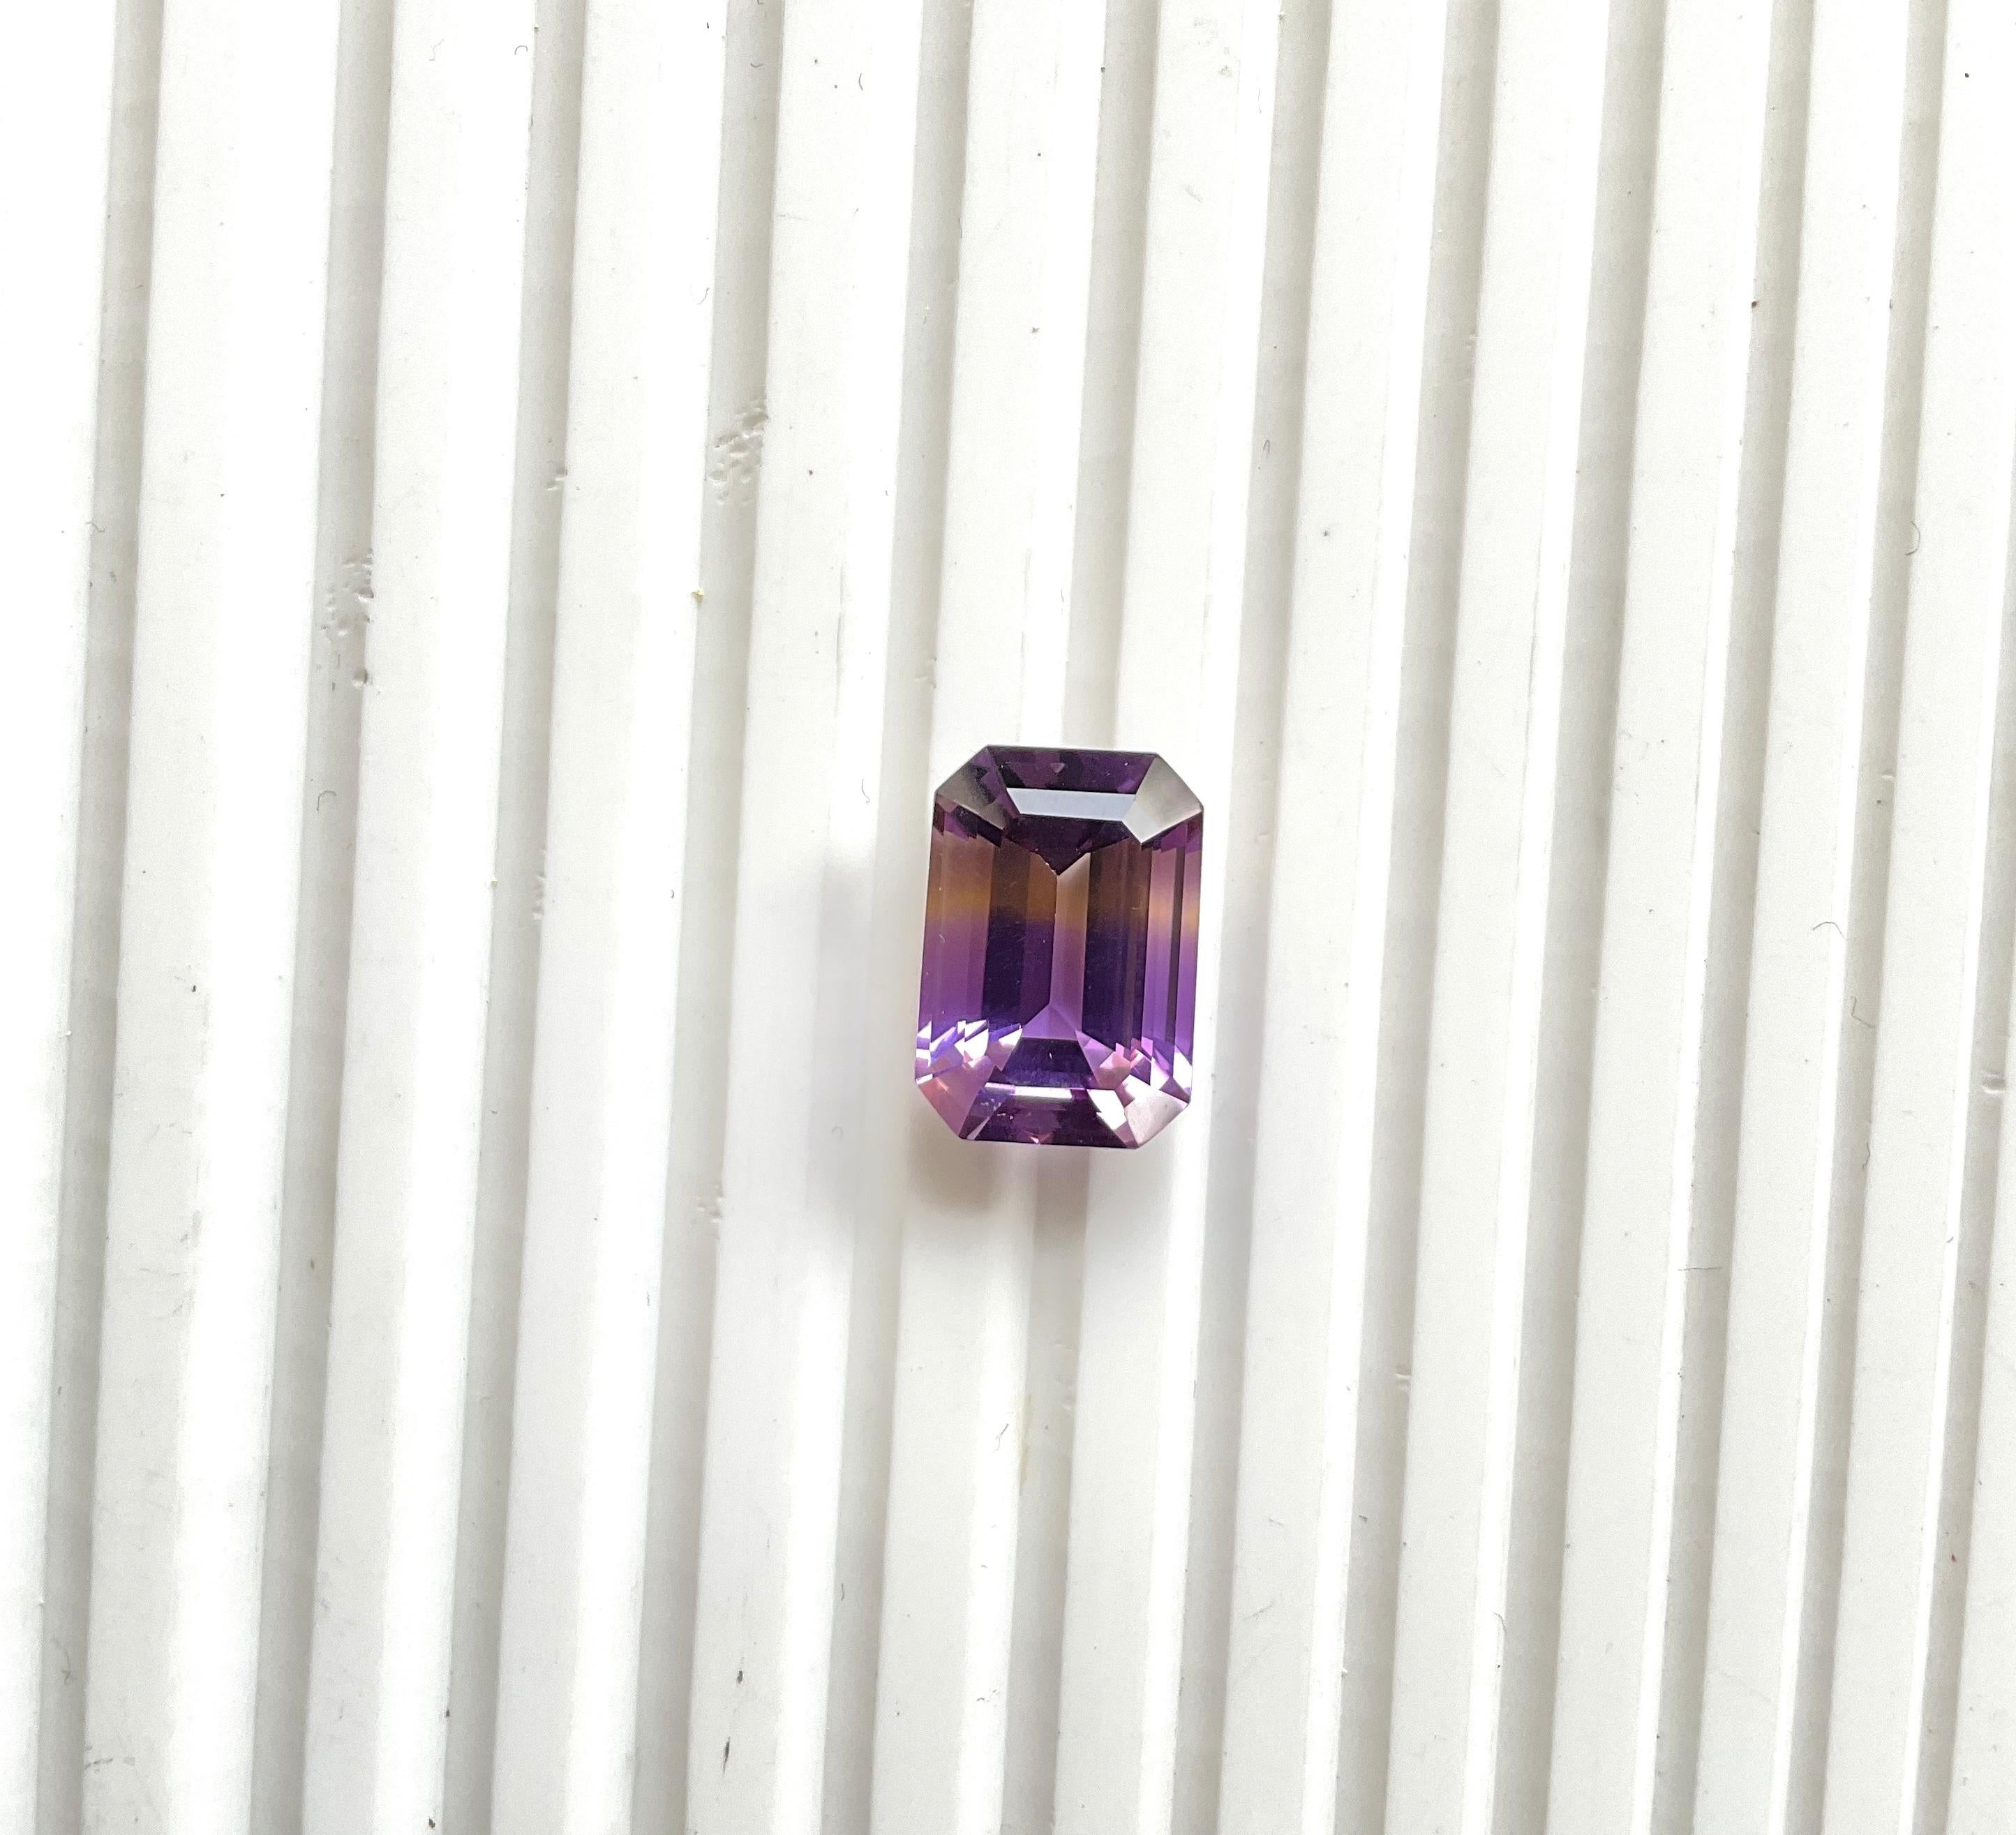 Gemstone Natural Ametrine
Clarity : Loupe Clean
Shape : Octagon
Size : 16x11x8 mm
Weight : 10.30 Carats
Origin : Bolivia
Treatment : None
.